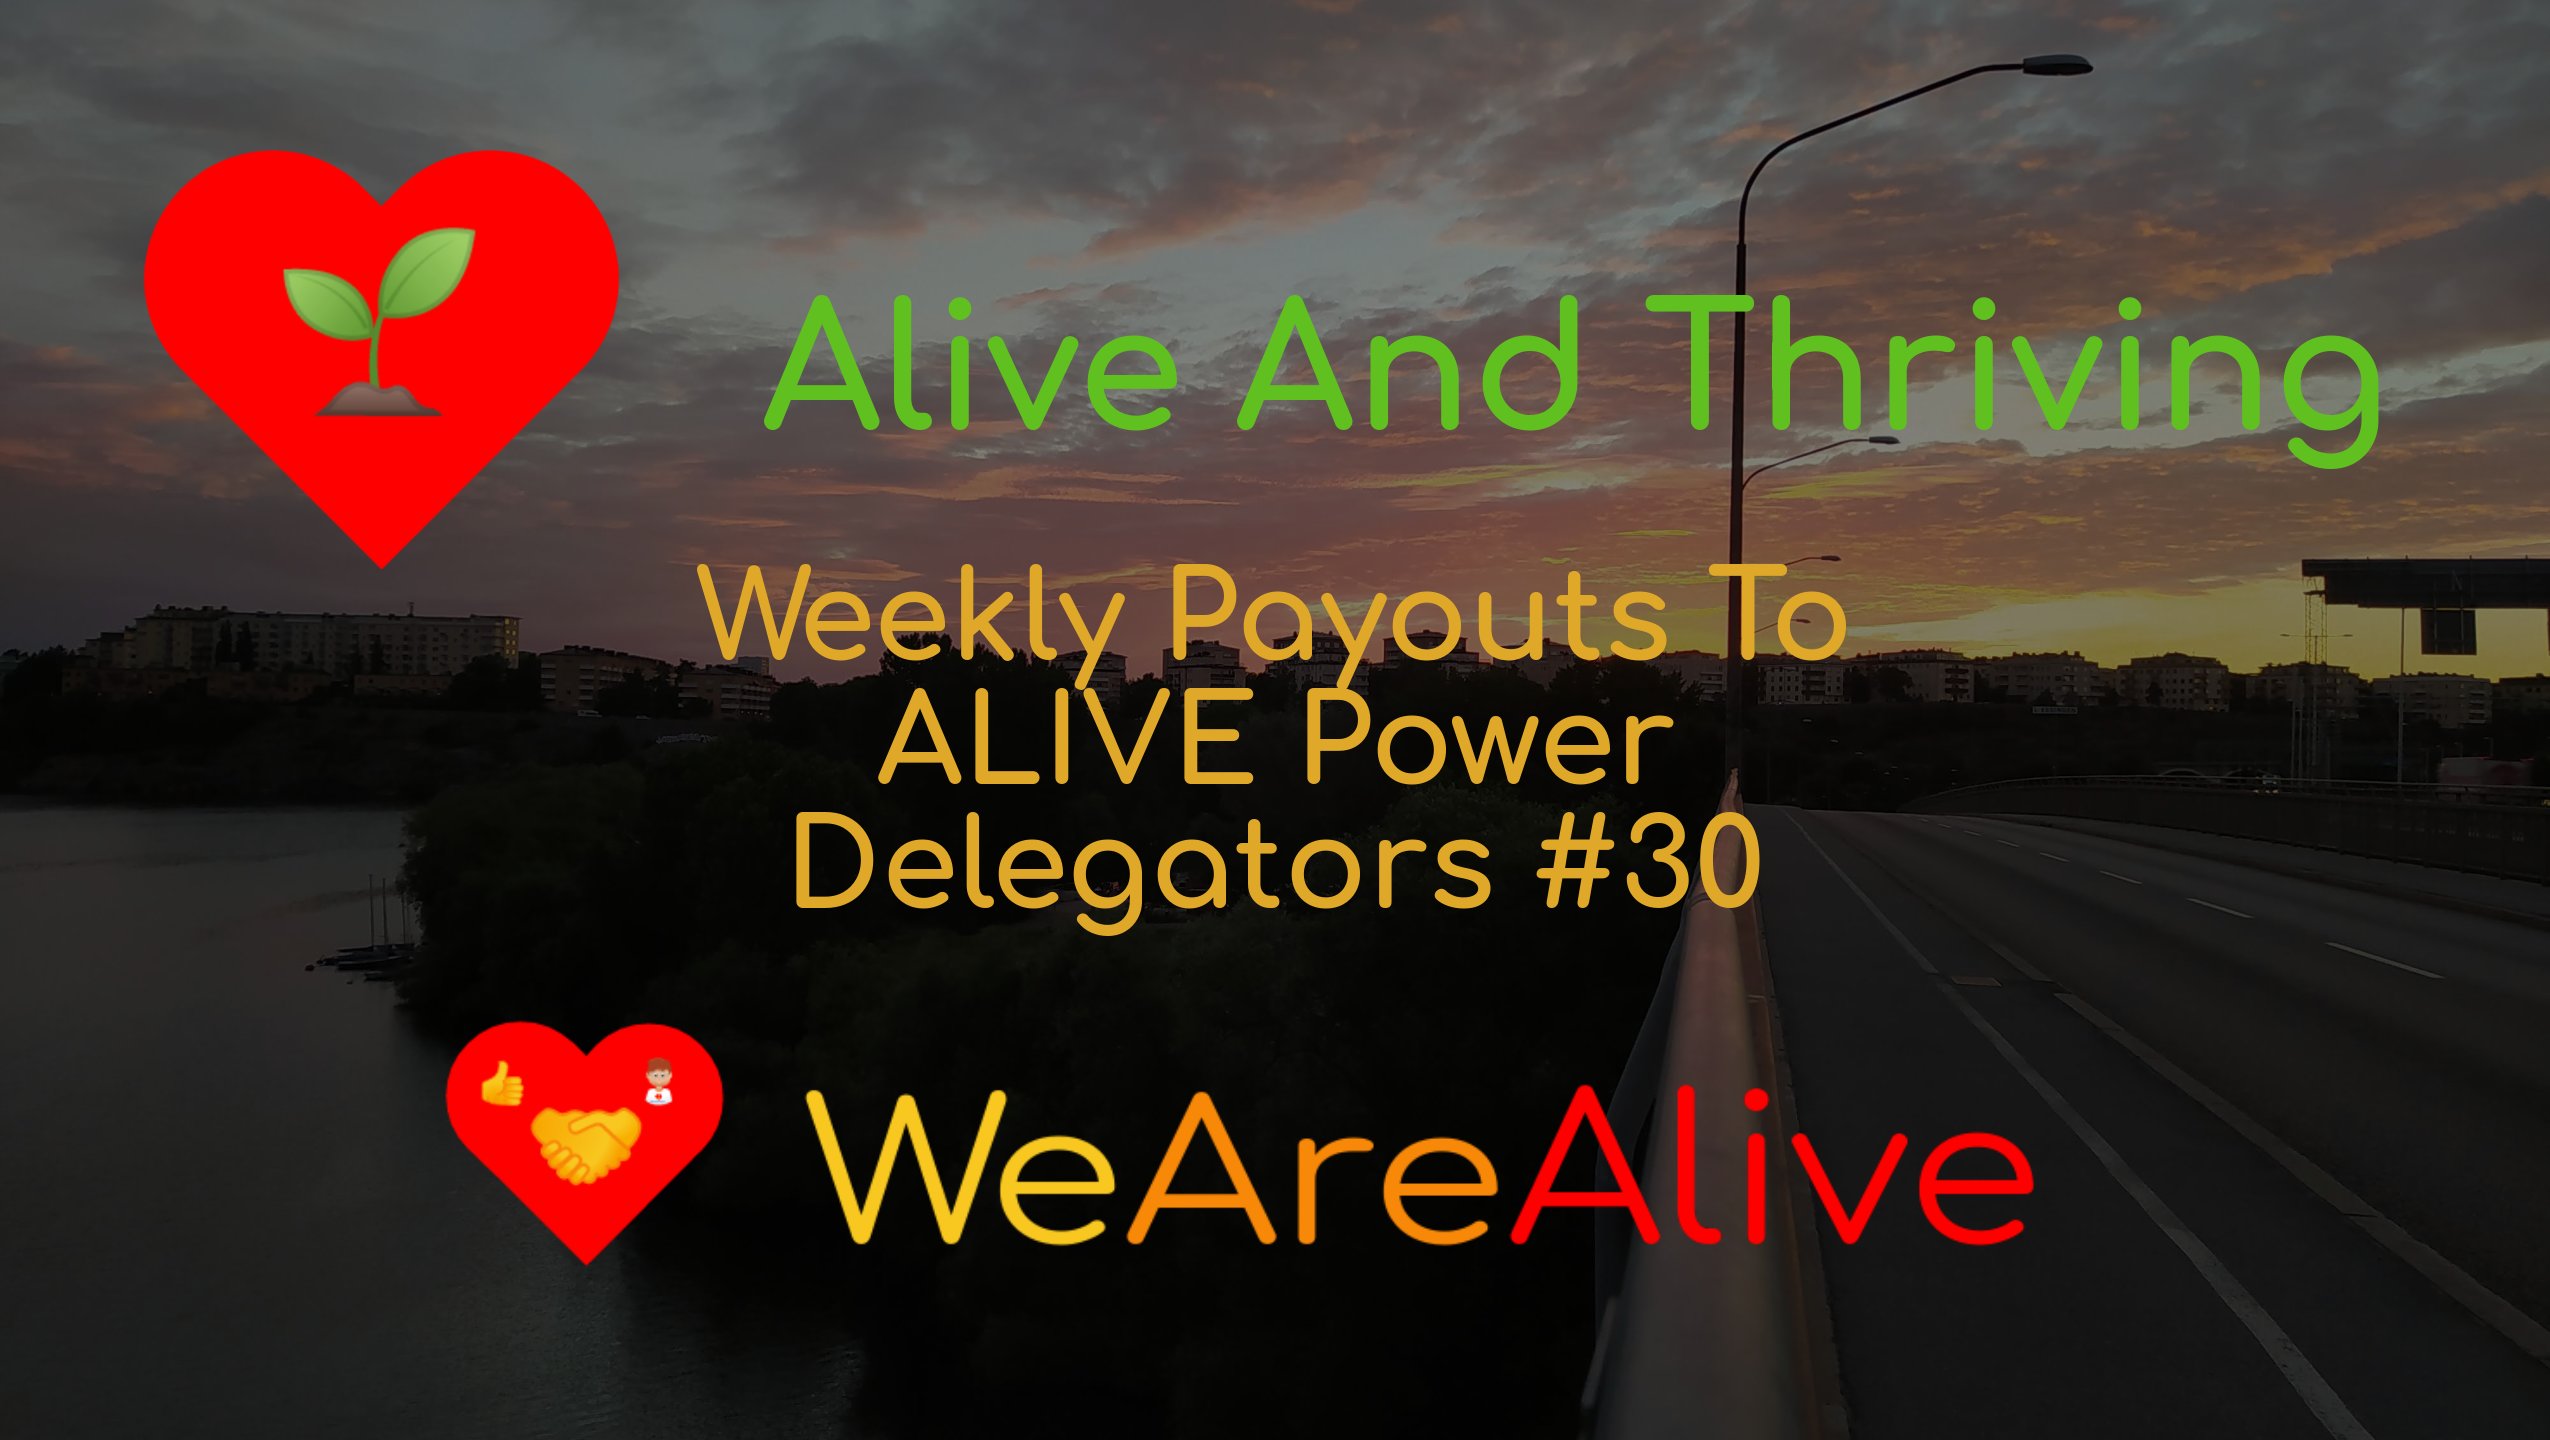 @wearealive/alive-and-thriving-weekly-payouts-to-alive-power-delegators-30